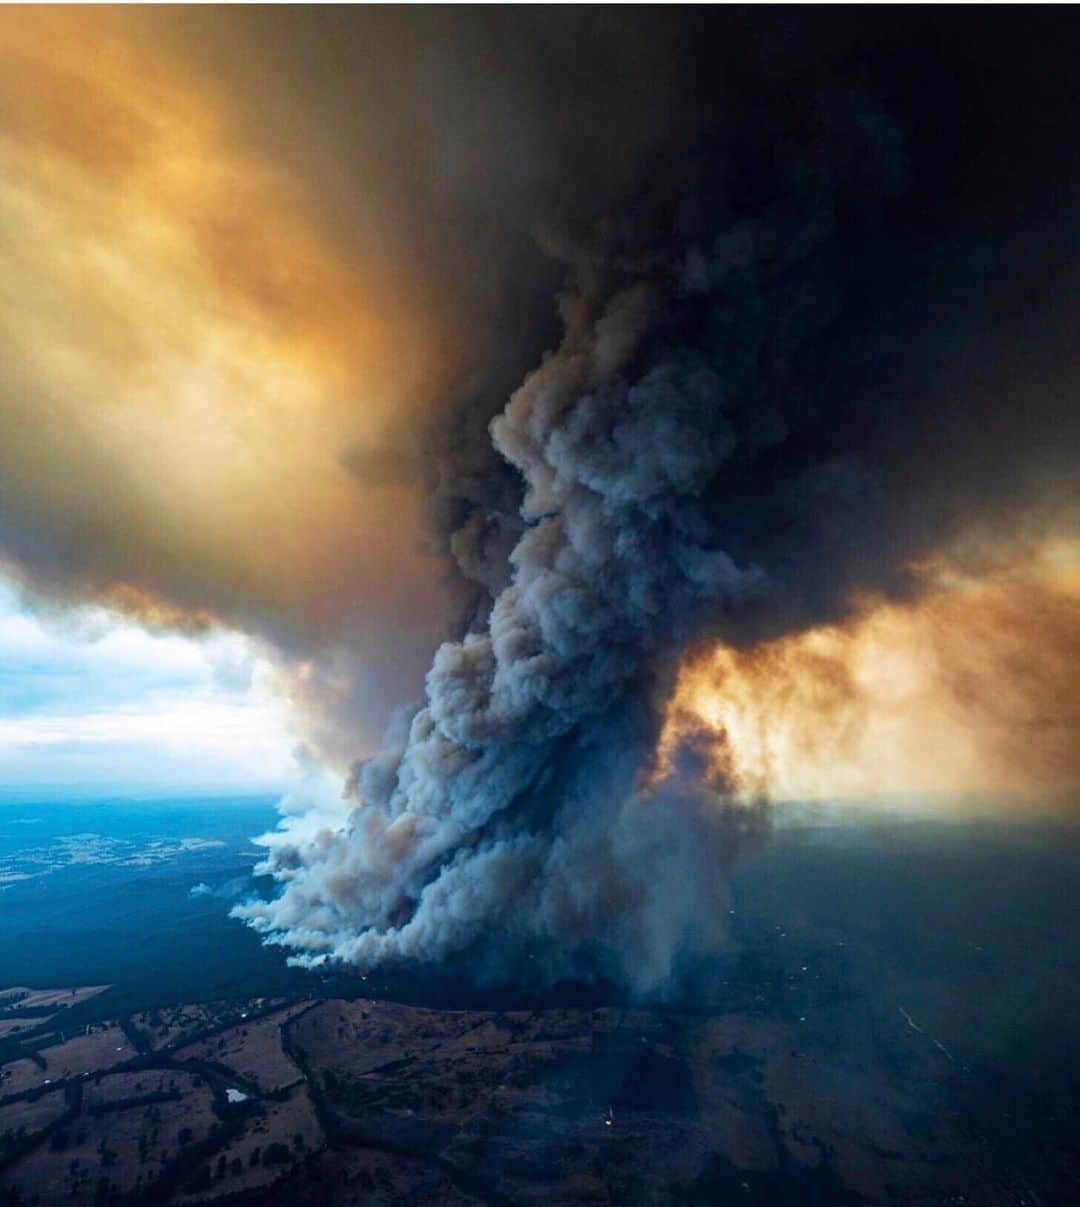 ジェシカ・スタインのインスタグラム：「Australia is BURNING. We cannot look away while so many homes, lives and futures are reduced to ash. We must make the change we want to see for our world, and right now millions can’t see through the smoke.  Our country has been burning for months. 20 lives have been lost, with dozens of people missing. An estimated 500 million animals have perished. Over 12 million acres of land has burnt. These fires will continue to burn for weeks, months to come. Please help in any way that you can wether it be donations of money, resources, time, blood or awareness and advocacy.  Here are some organisations where you can donate: - NSW Rural Fire Service @nswrfs https://www.rfs.nsw.gov.au/volunteer/support-your-local-brigade - Victorian Country Fire Association (CFA) @cfavic https://www.cfa.vic.gov.au/about/supporting-cfa#donate-cfa - Rural Fire Brigade Association Queensland (RFBAQ) https://www.rfbaq.org/donate-to-rfbaq - South Australia Country Fire Service (CFS) https://cfsfoundation.org.au/donate - WIRES - NSW Wildlife Information, Rescue and Education Service https://www.wires.org.au/donate/now - Fire Relief Fund for First Nation Communities https://au.gofundme.com/f/fire-relief-fund-for-first-nations-communities - Direct donation to the families of 3 NSW fire fighters who lost their lives http://www.rfs.nsw.gov.au/news-and-media/general-news/featured/support-for-firefighter-families  Just one incredible human @celestebarber has made waves from ripples with her fundraiser for the RFS, the link is in my Bio where anyone can easily internationally donate.  If anyone displaced needs somewhere to stay, I have a spare room available on the Central Coast.  I’m sorry I haven’t been sharing for months as I have been struggling with my health, and found that being online wasn’t the best place for me. But in times of need, social media can unite and empower us all. The ability to empathise with and support those facing catastrophe on the other side of the world should not be taken for granted. We all breathe the same air and wether it be today or tomorrow; climate change will effect us all.  My apologies for not being able to locate image credits, please email me.」